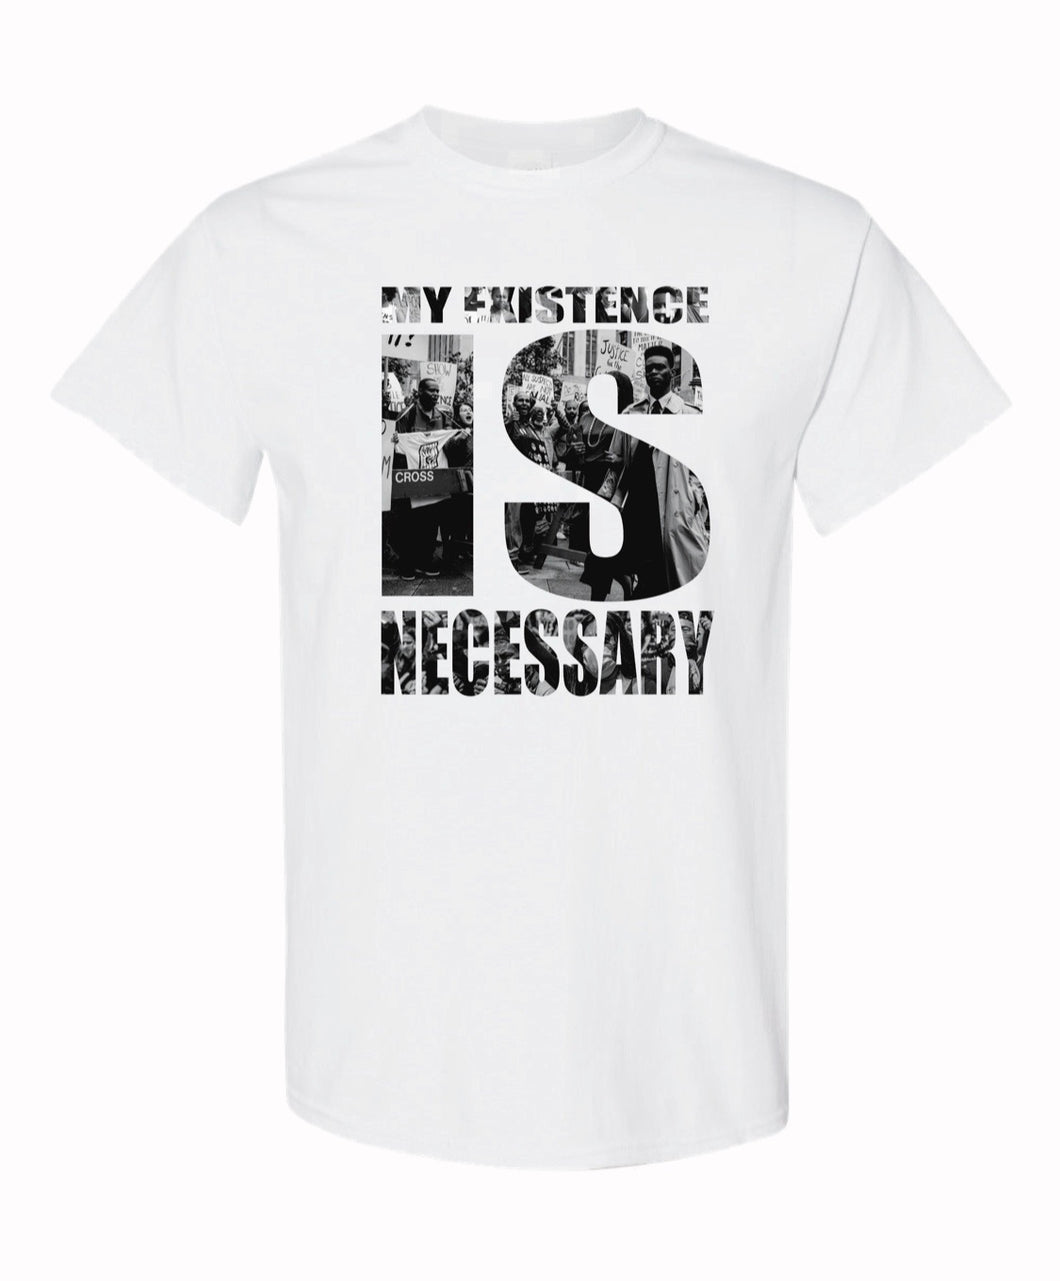 NBC exclusive My existence is necessary white t shirt